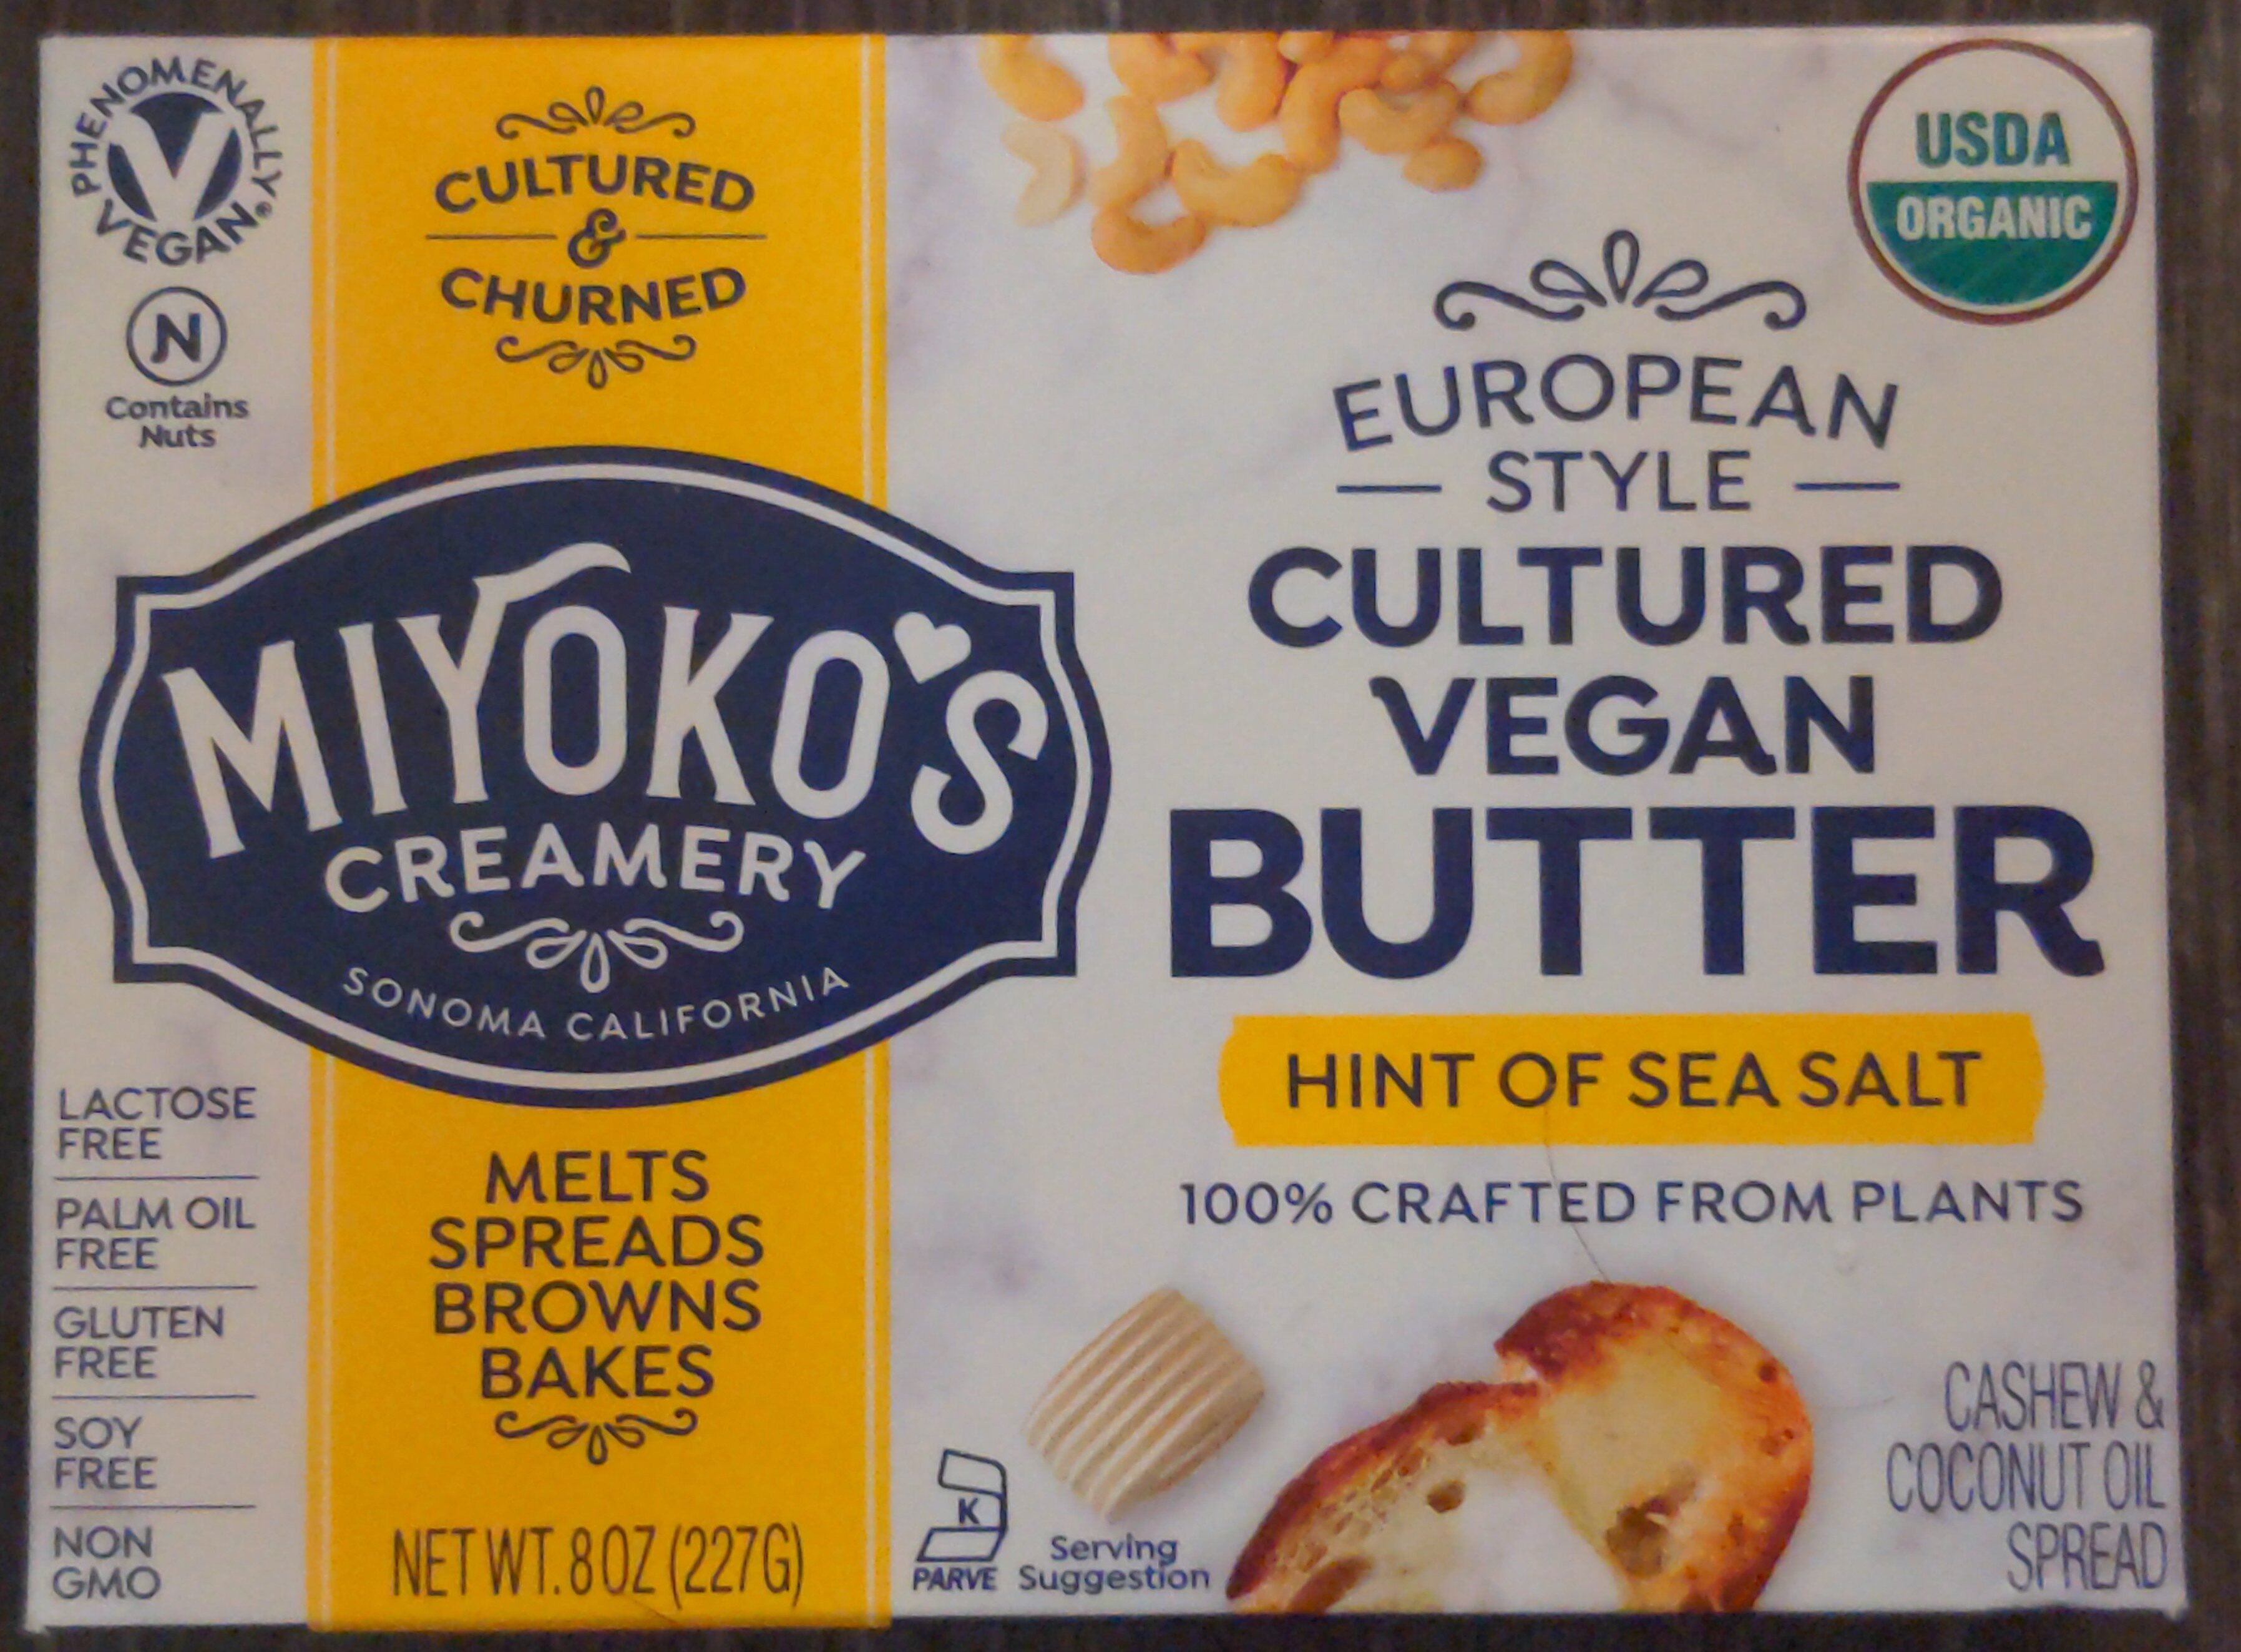 European style cultured vegan butter, european style - Product